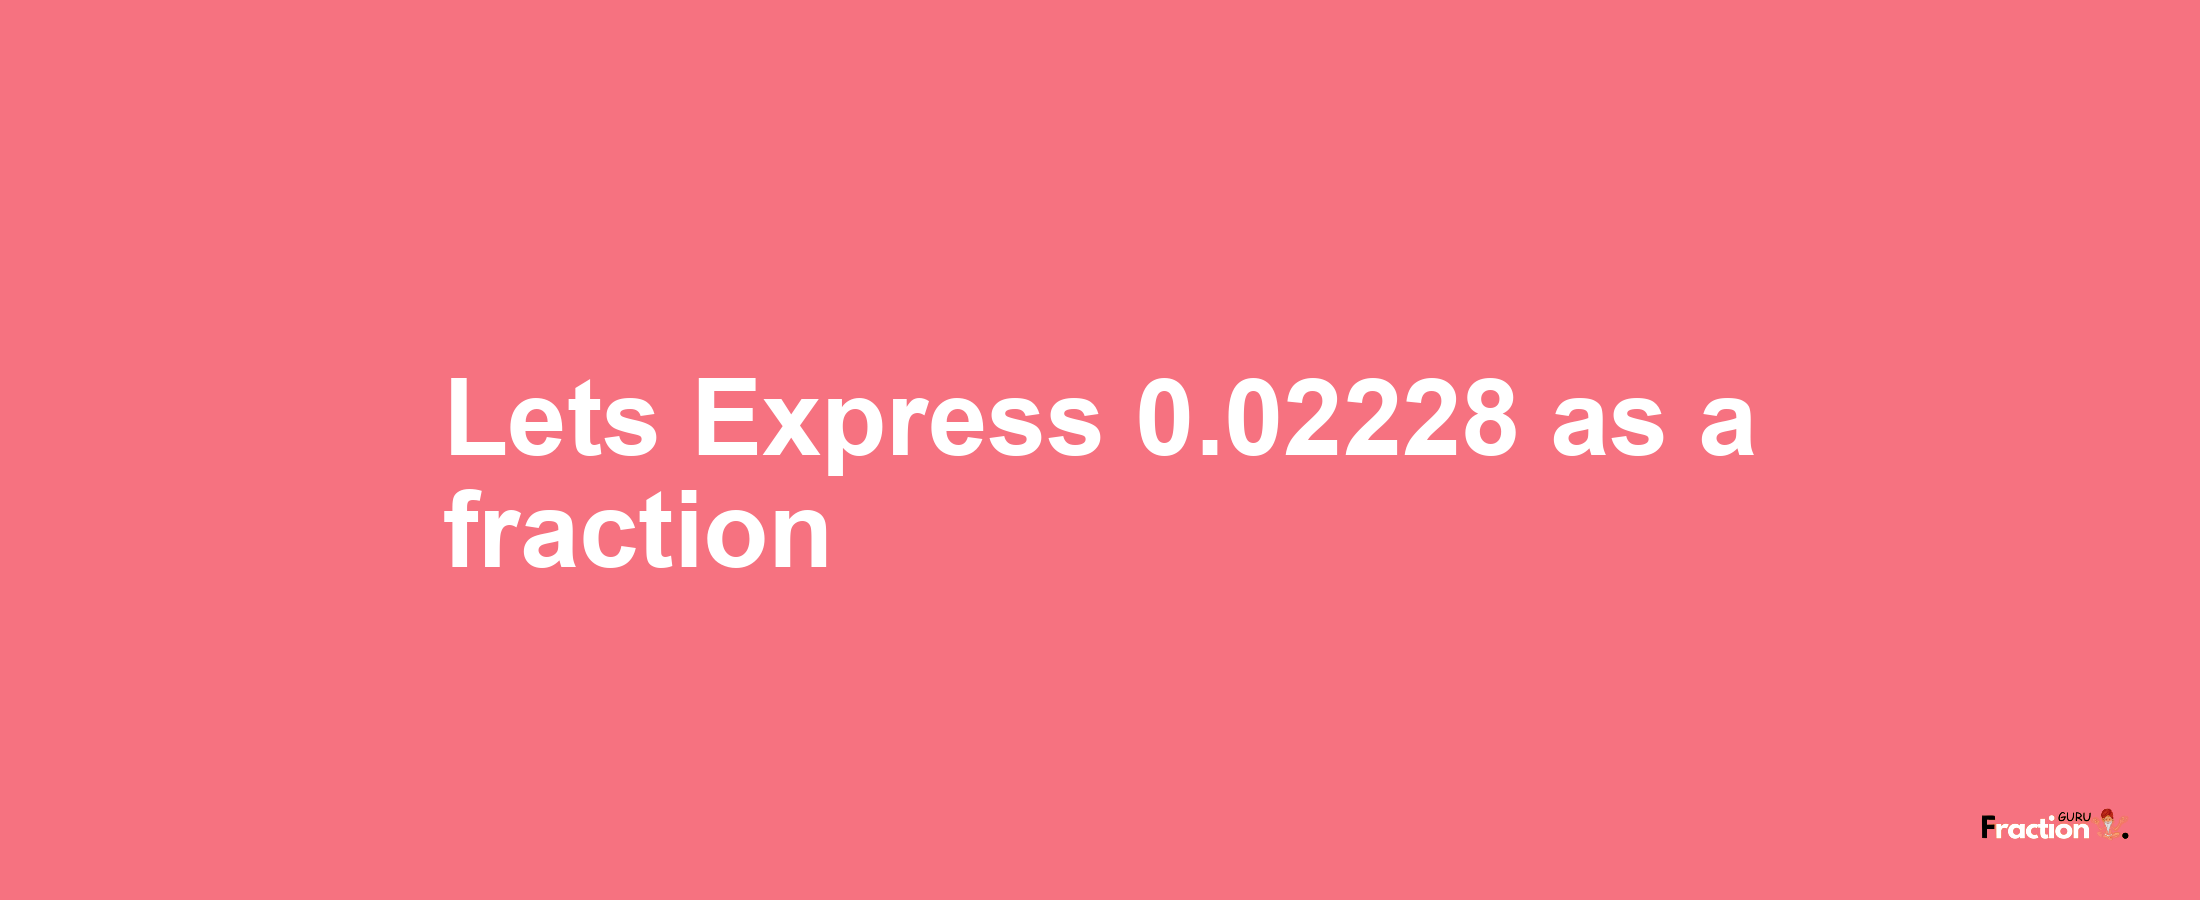 Lets Express 0.02228 as afraction